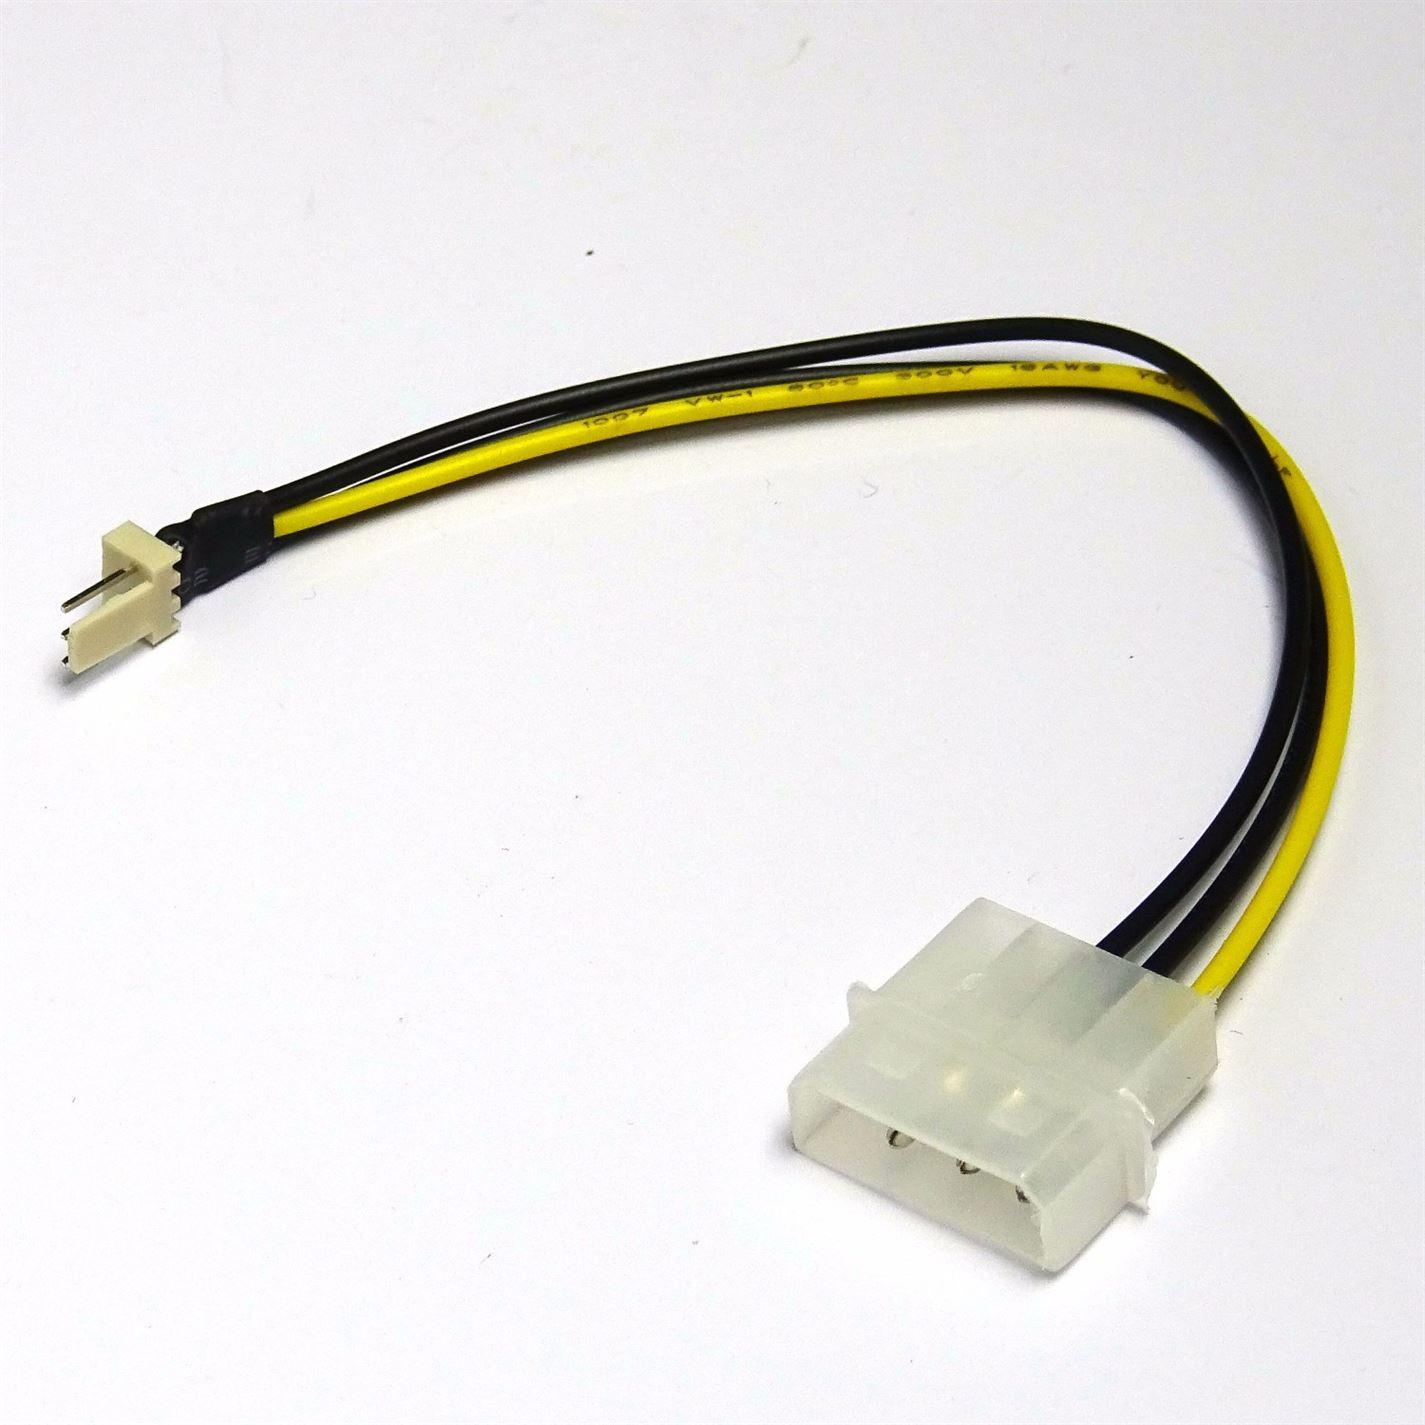 4-Pin Molex/IDE to 3-Pin CPU/Case Fan Power Connector Cable Adapters 20cm - UK Seller